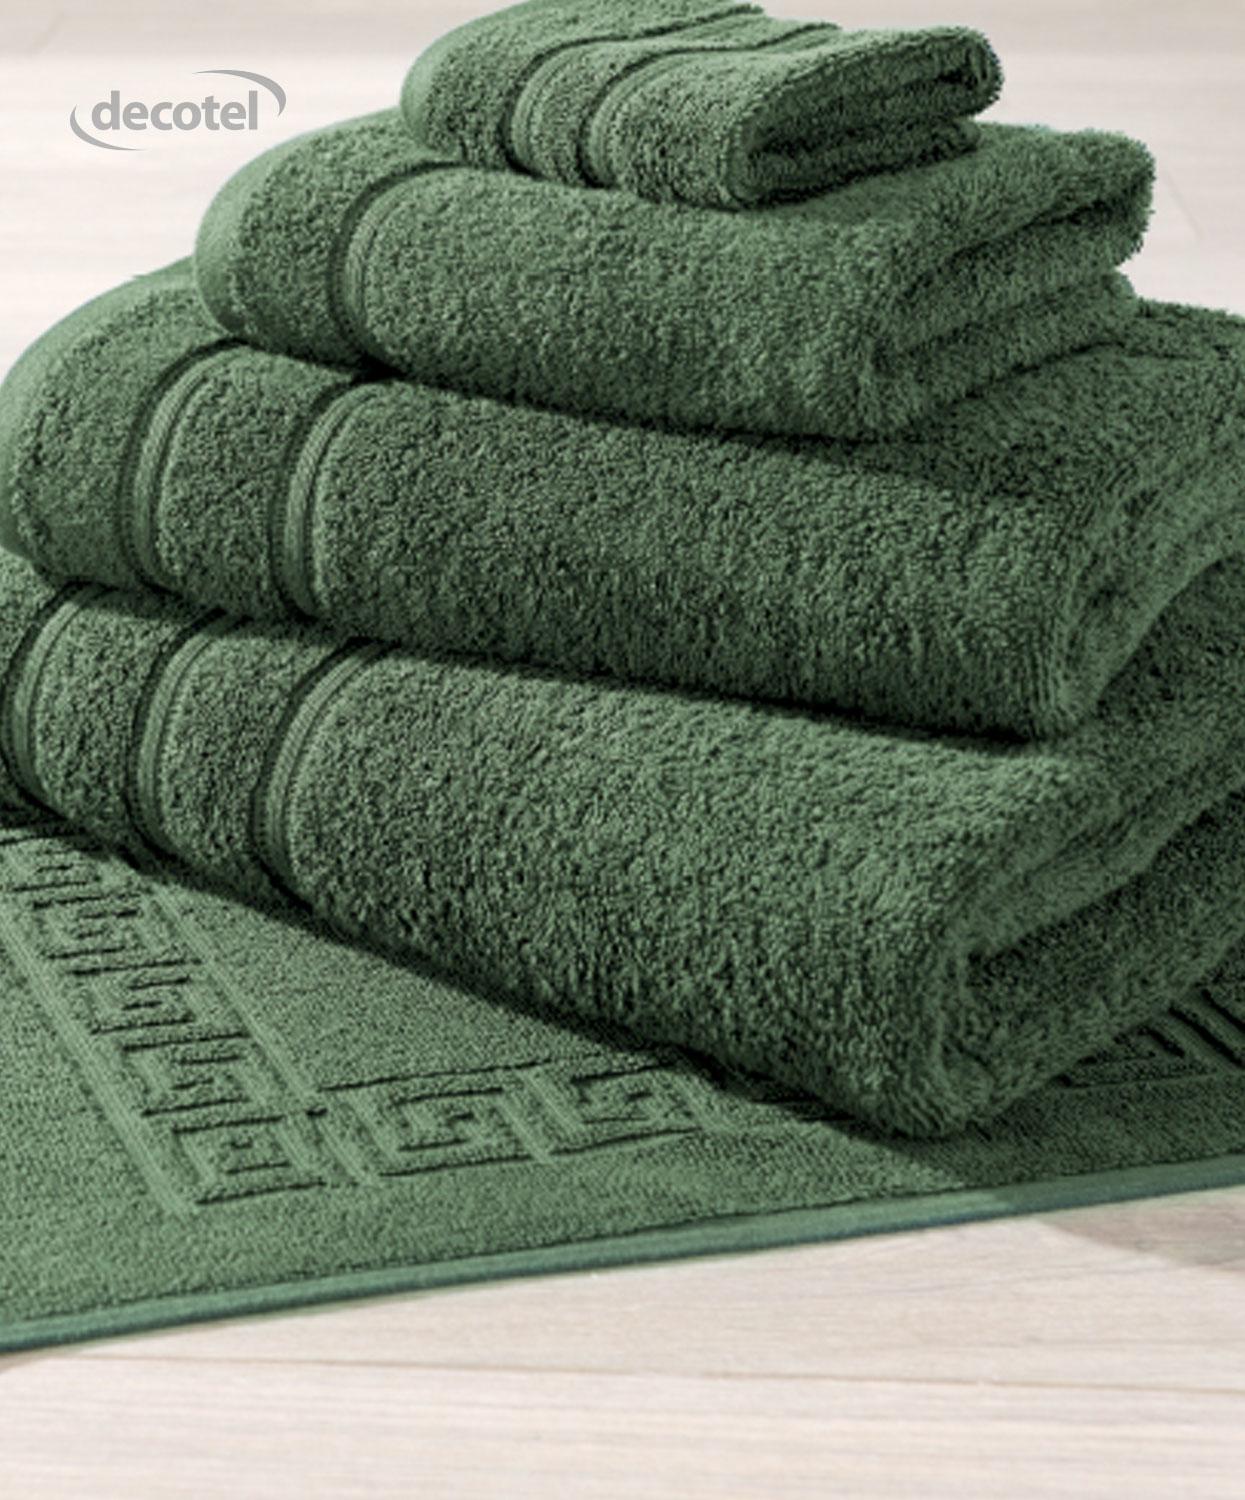 Eclipse towel in forest green